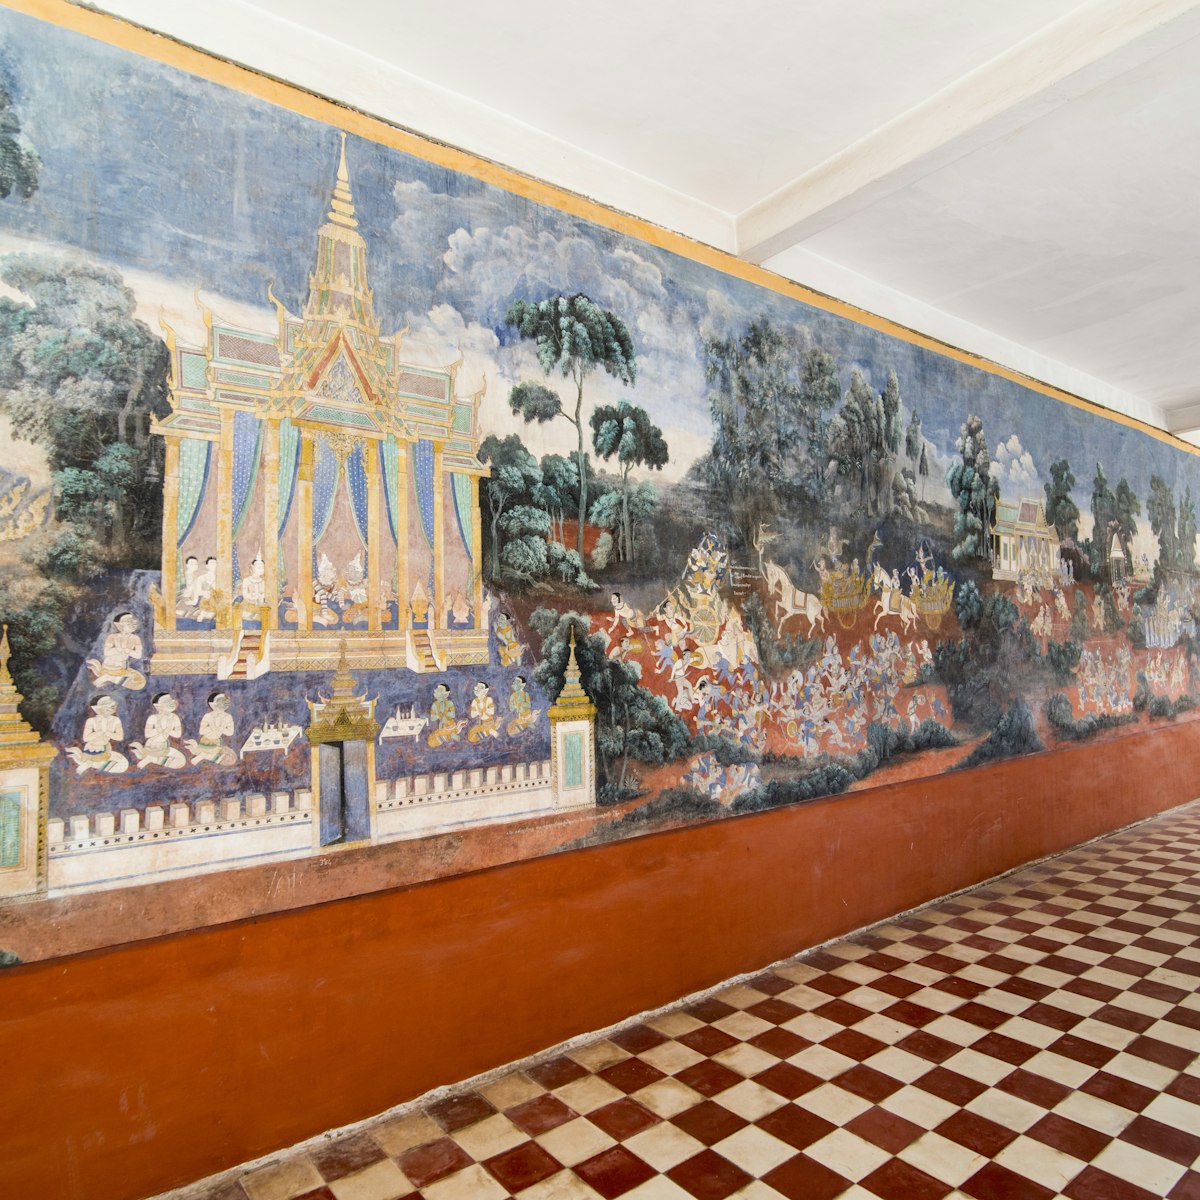 The Ramayana Mural paintings at the silver Pagoda of the Royal Palace in the city of Phnom Penh of Cambodia.